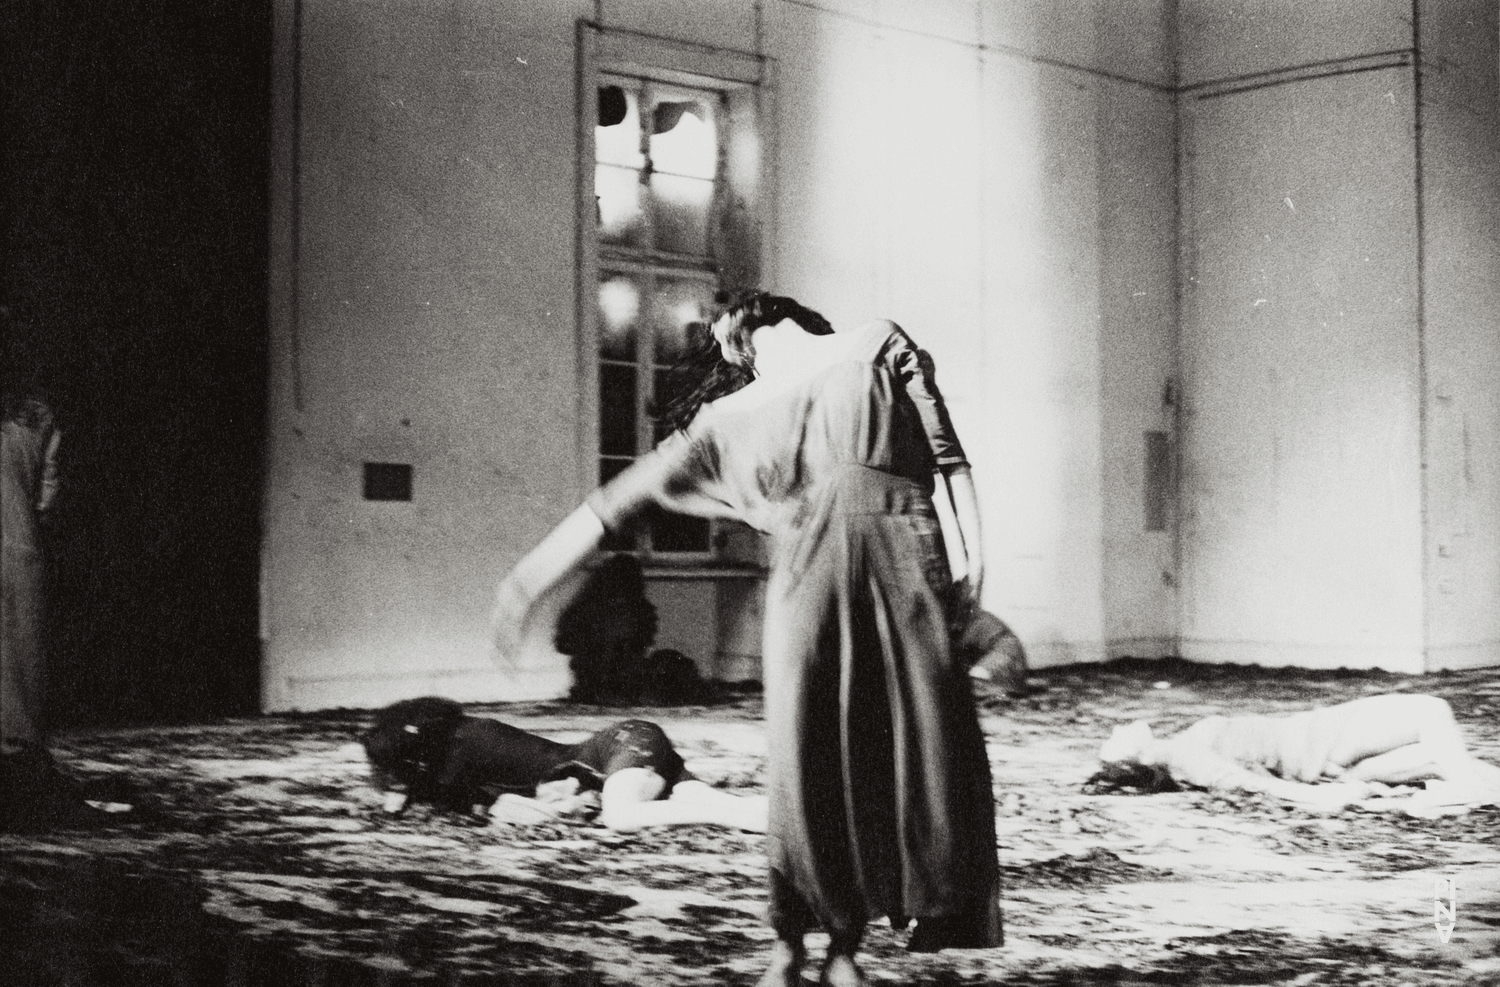 Beatrice Libonati and Heide Tegeder in “Bluebeard. While Listening to a Tape Recording of Béla Bartók's Opera "Duke Bluebeard's Castle"” by Pina Bausch